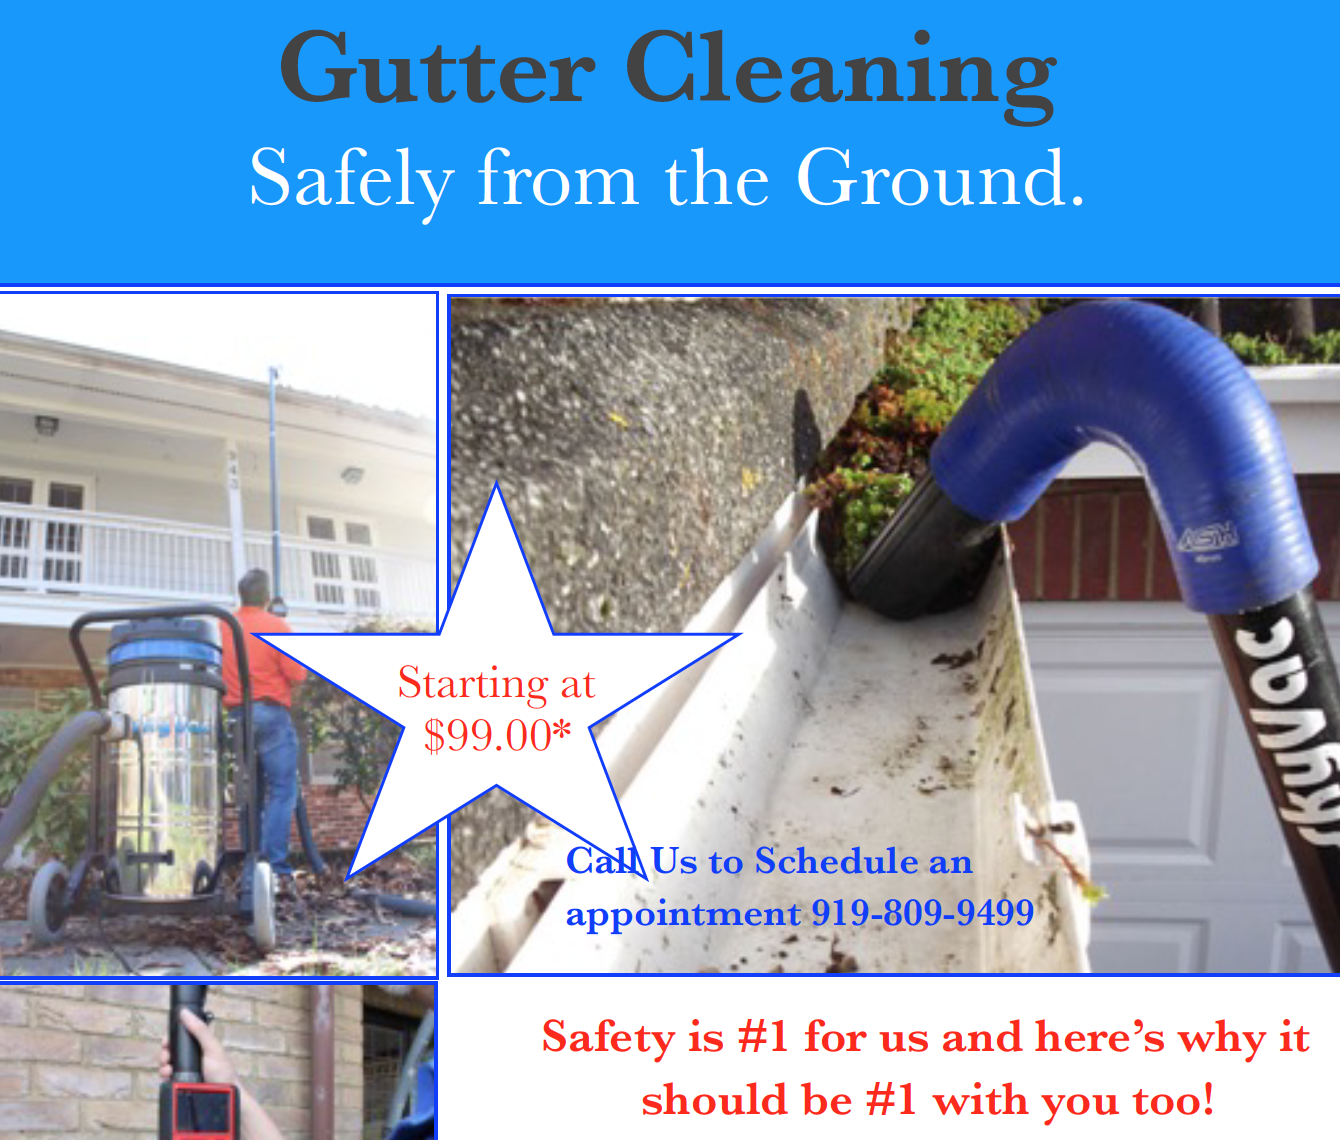 SkyVac®️ Flyer Gutter Cleaning PDF